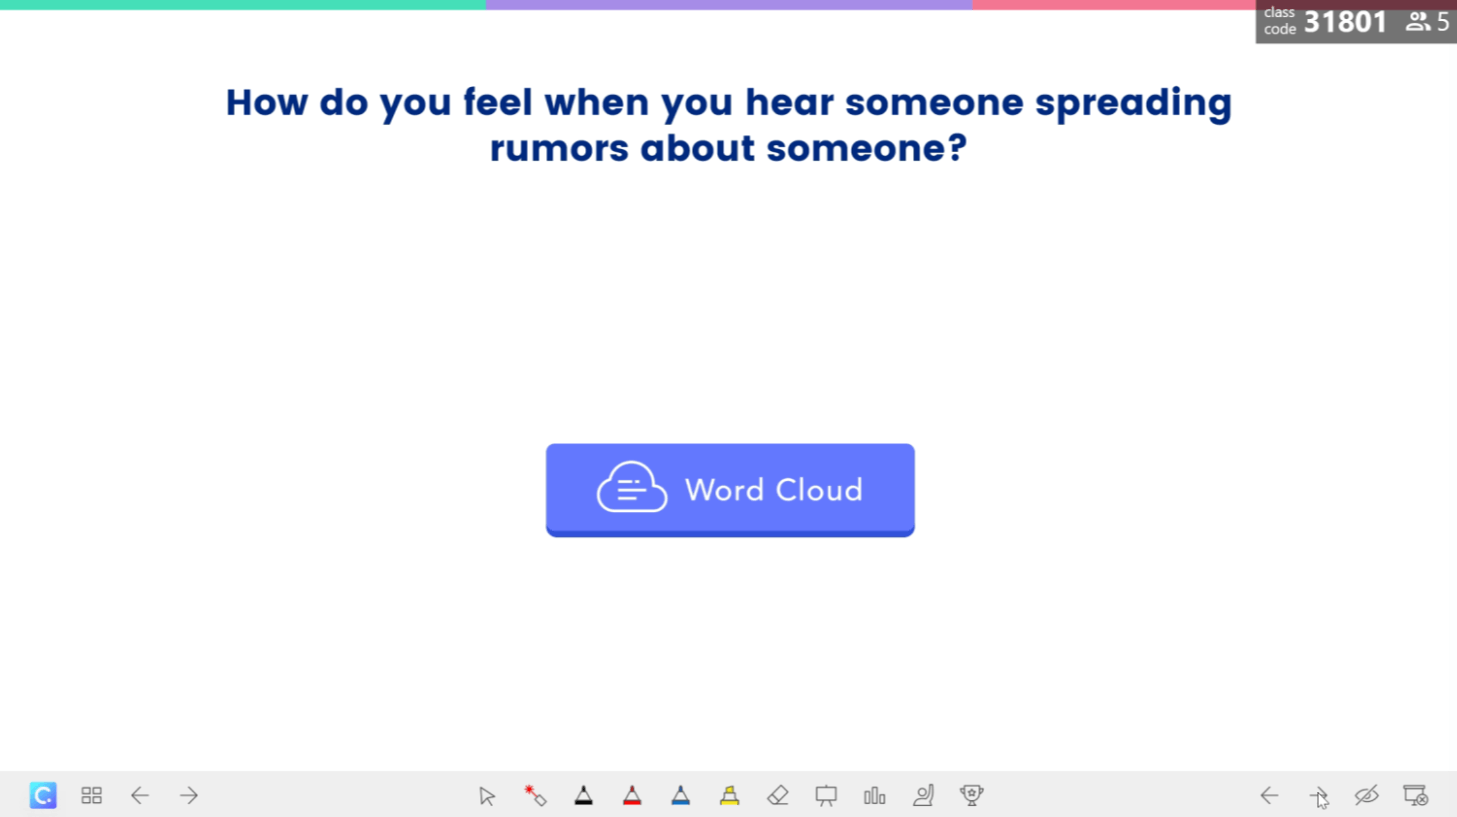 Word Cloud activities: How do you feel when someone spreads rumors?